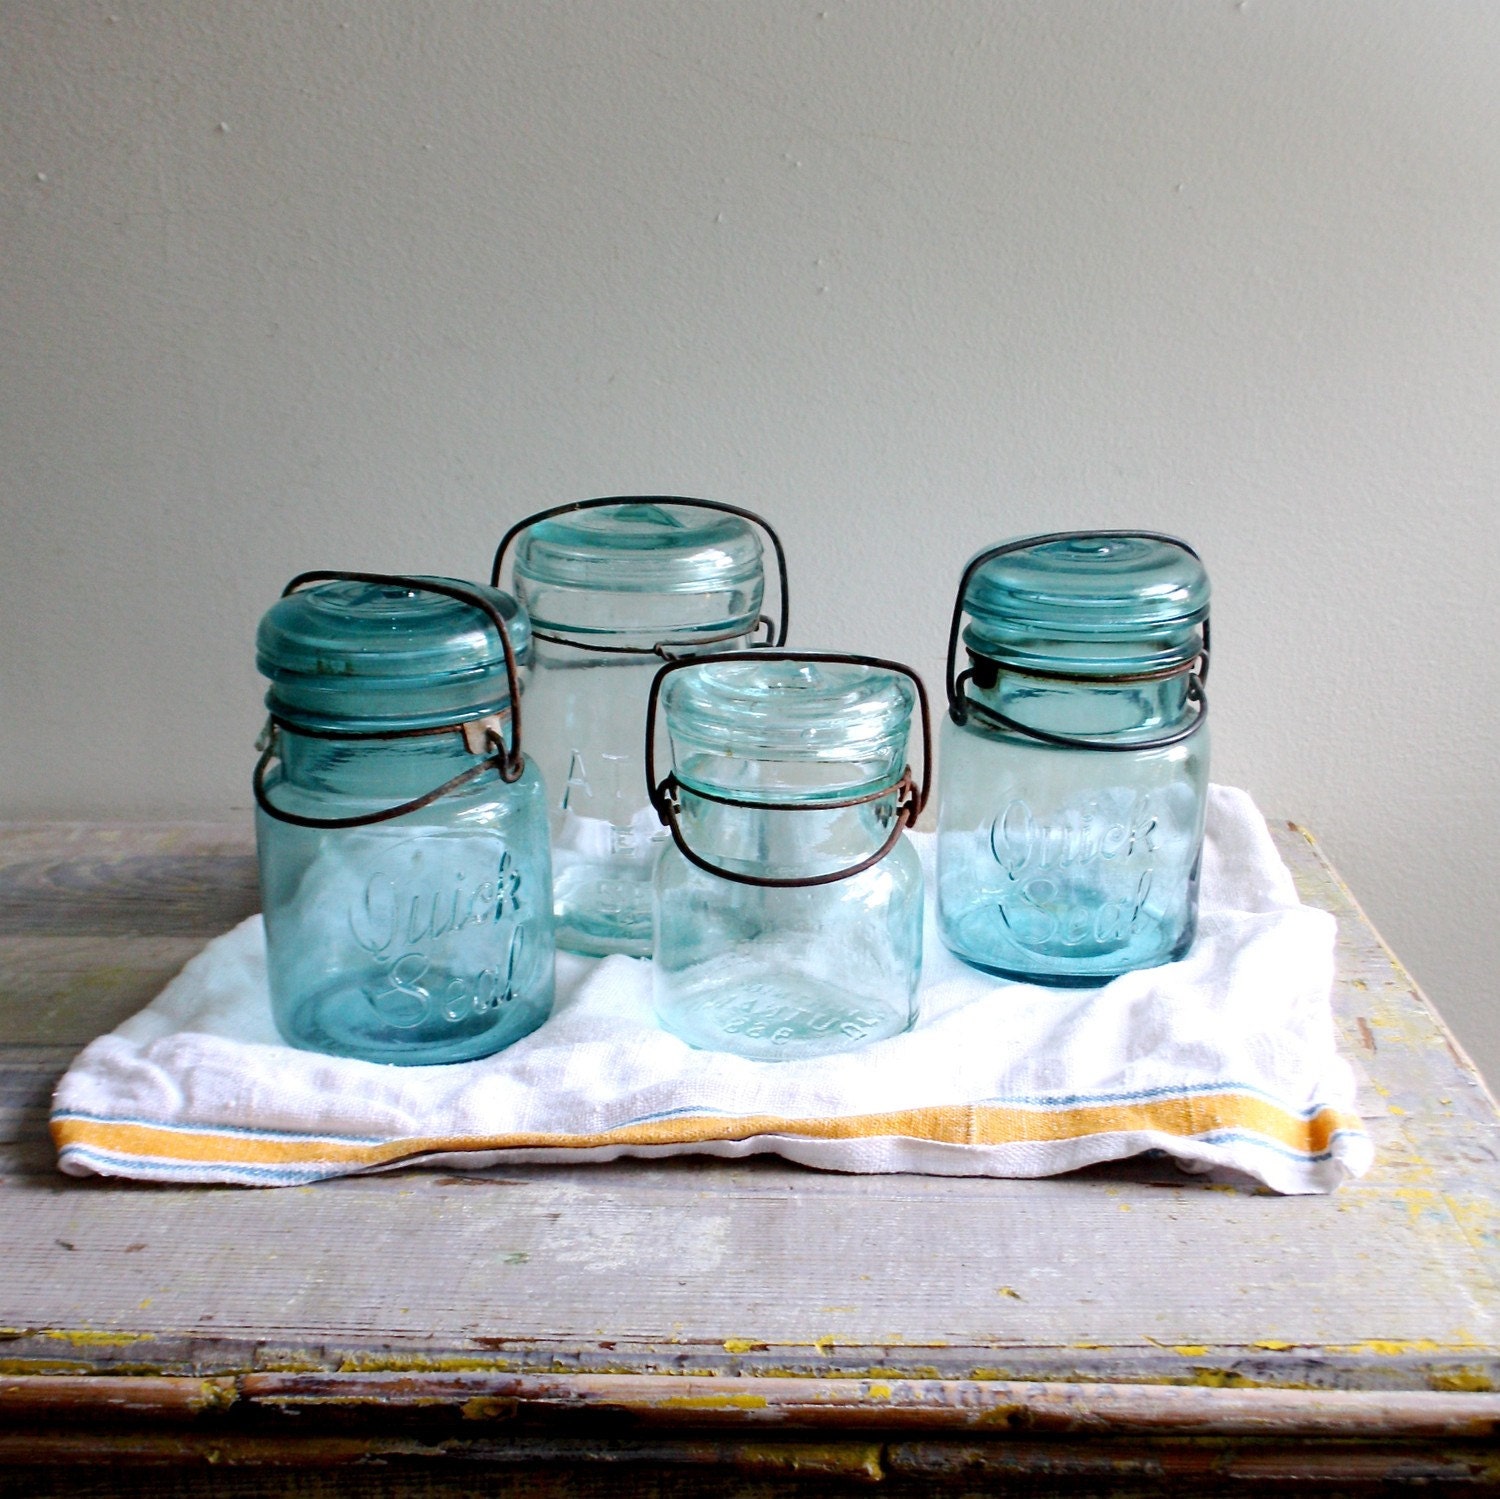 Collection of Blue Mason Jars in a Fruit Box